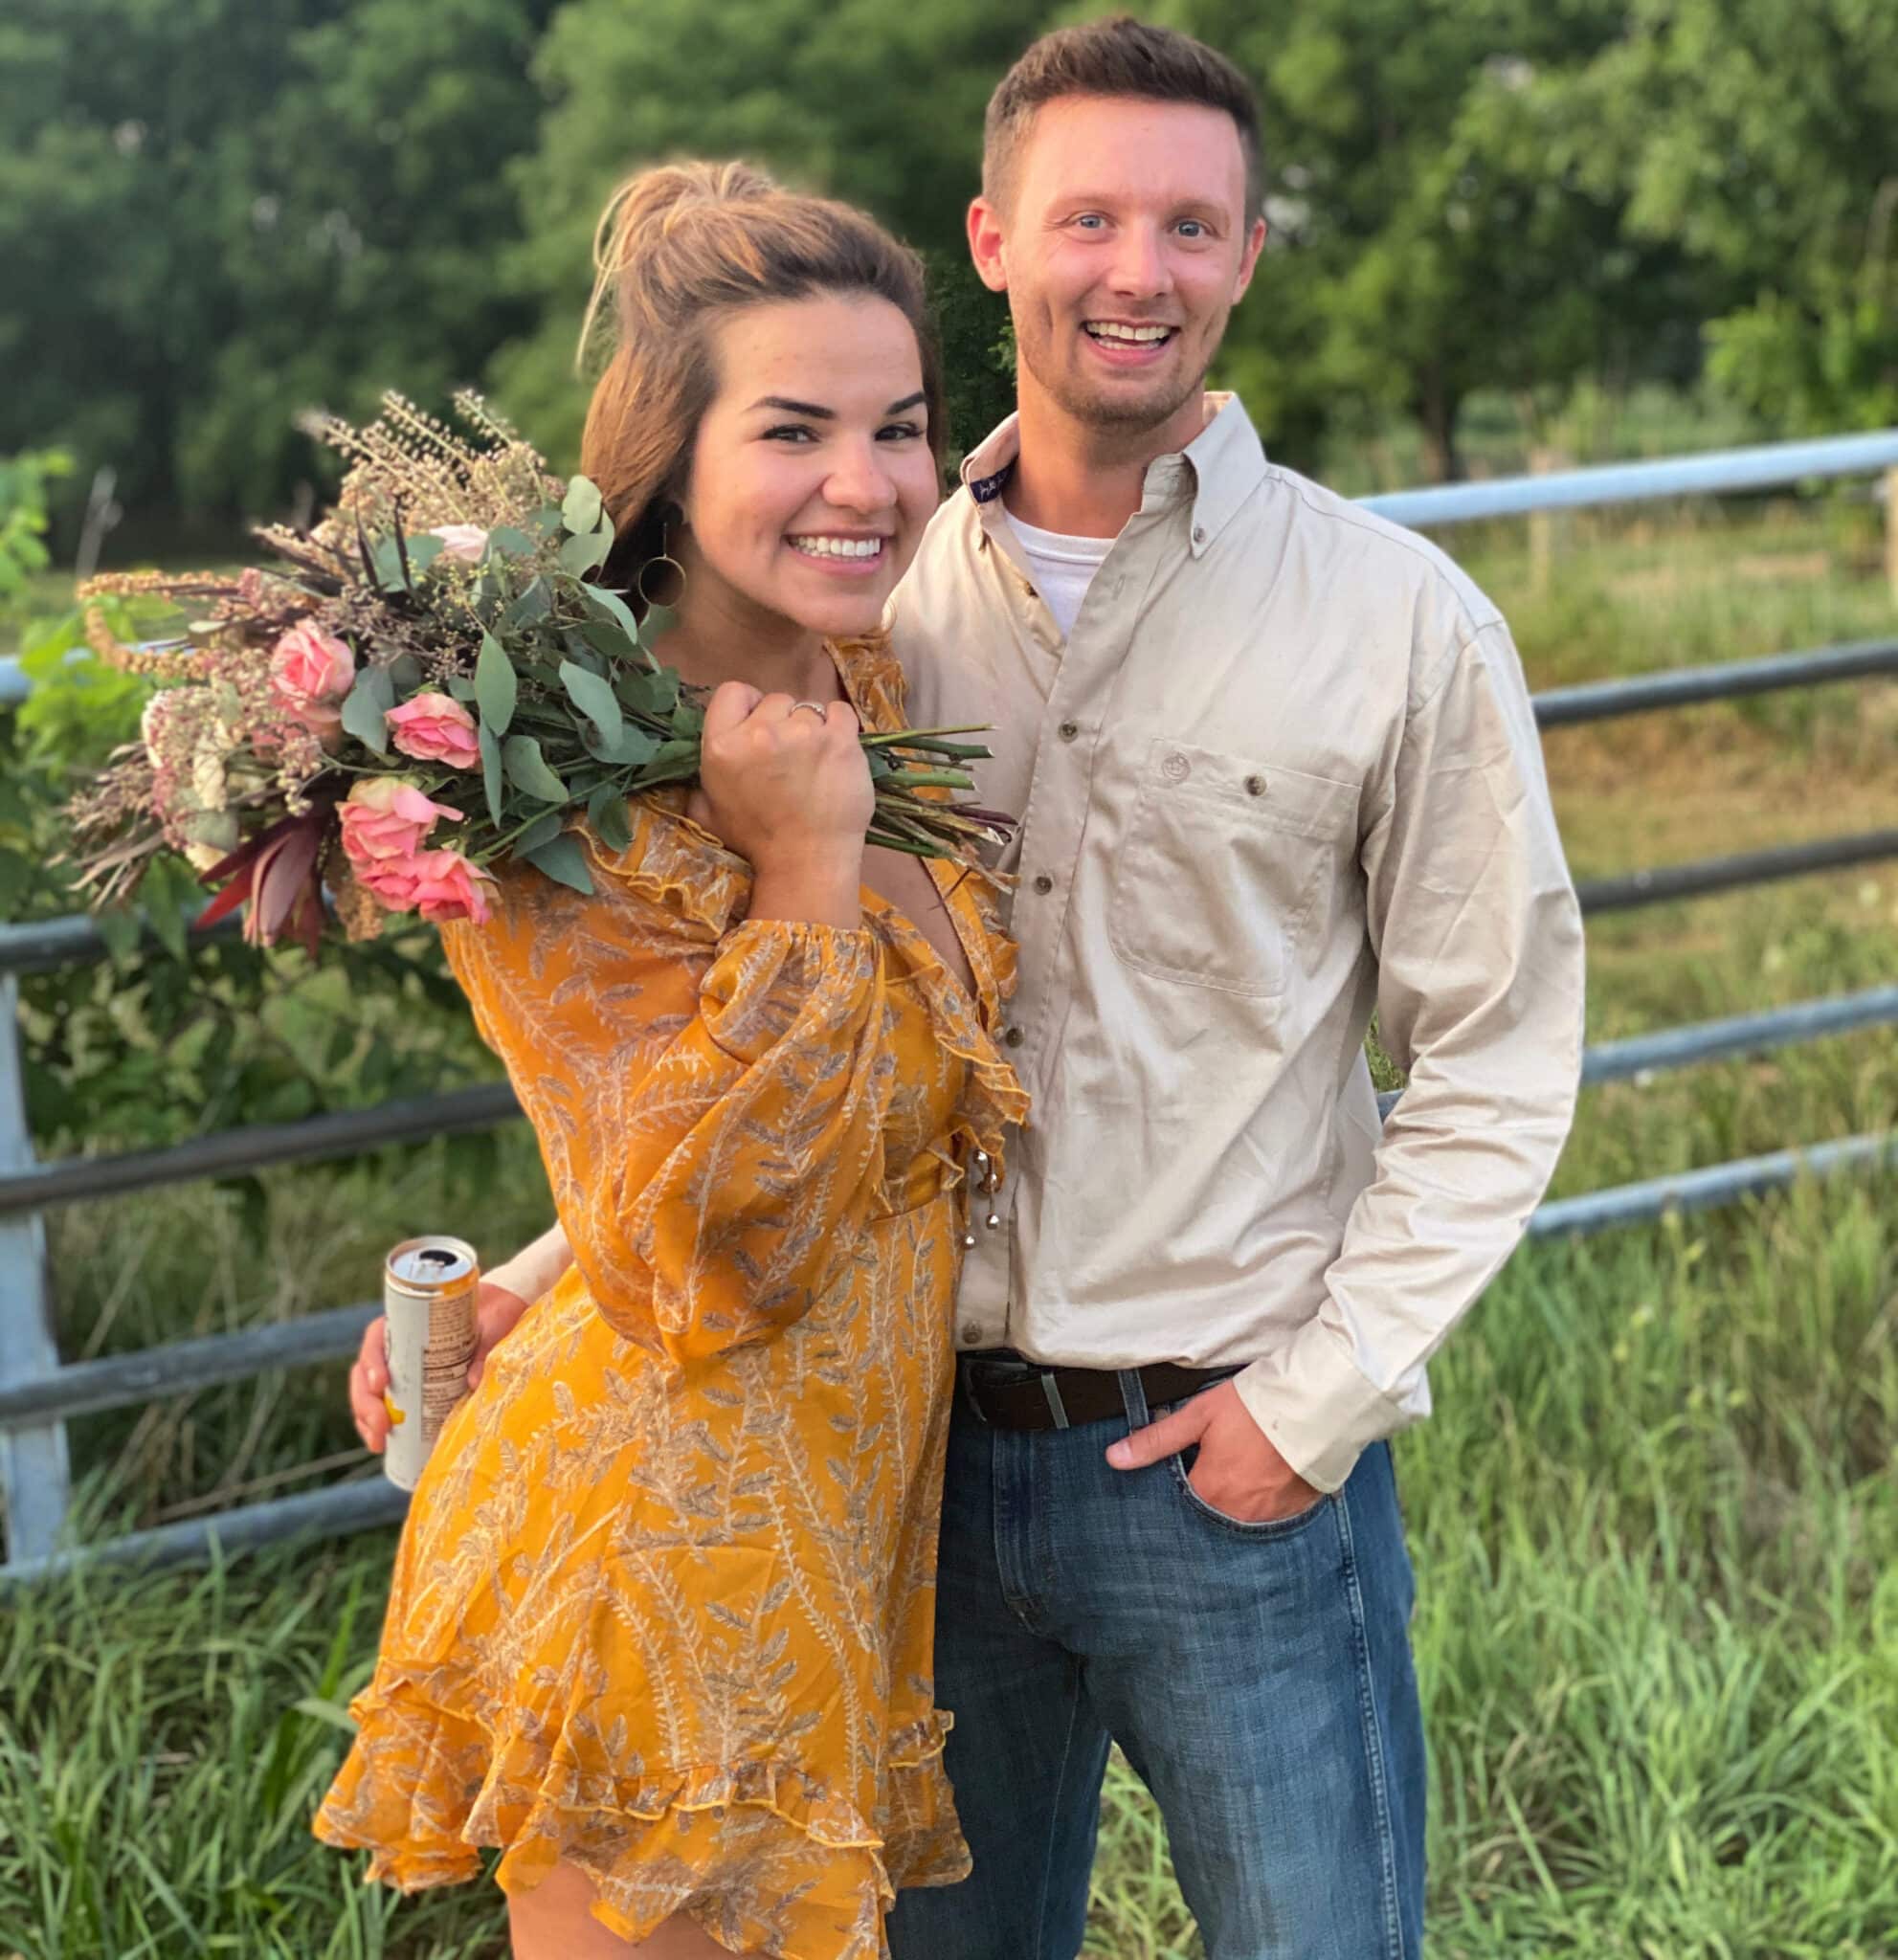 woman in bright yellow dress smiles holding bouquet of wild flowers with man in long sleeve button down shirt stands next to her smiling